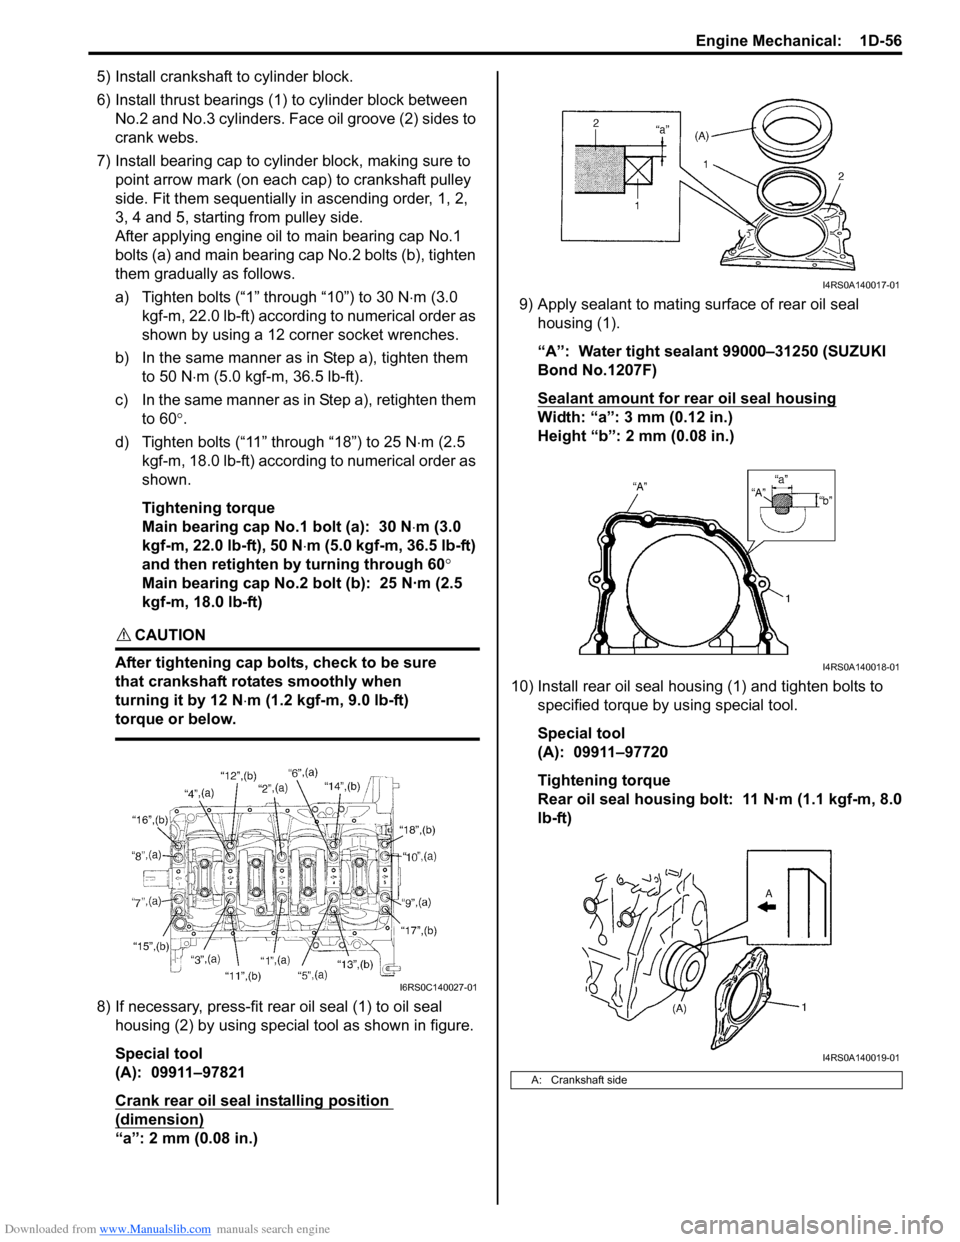 SUZUKI SWIFT 2006 2.G Service Owners Guide Downloaded from www.Manualslib.com manuals search engine Engine Mechanical:  1D-56
5) Install crankshaft to cylinder block.
6) Install thrust bearings (1) to cylinder block between No.2 and No.3 cylin